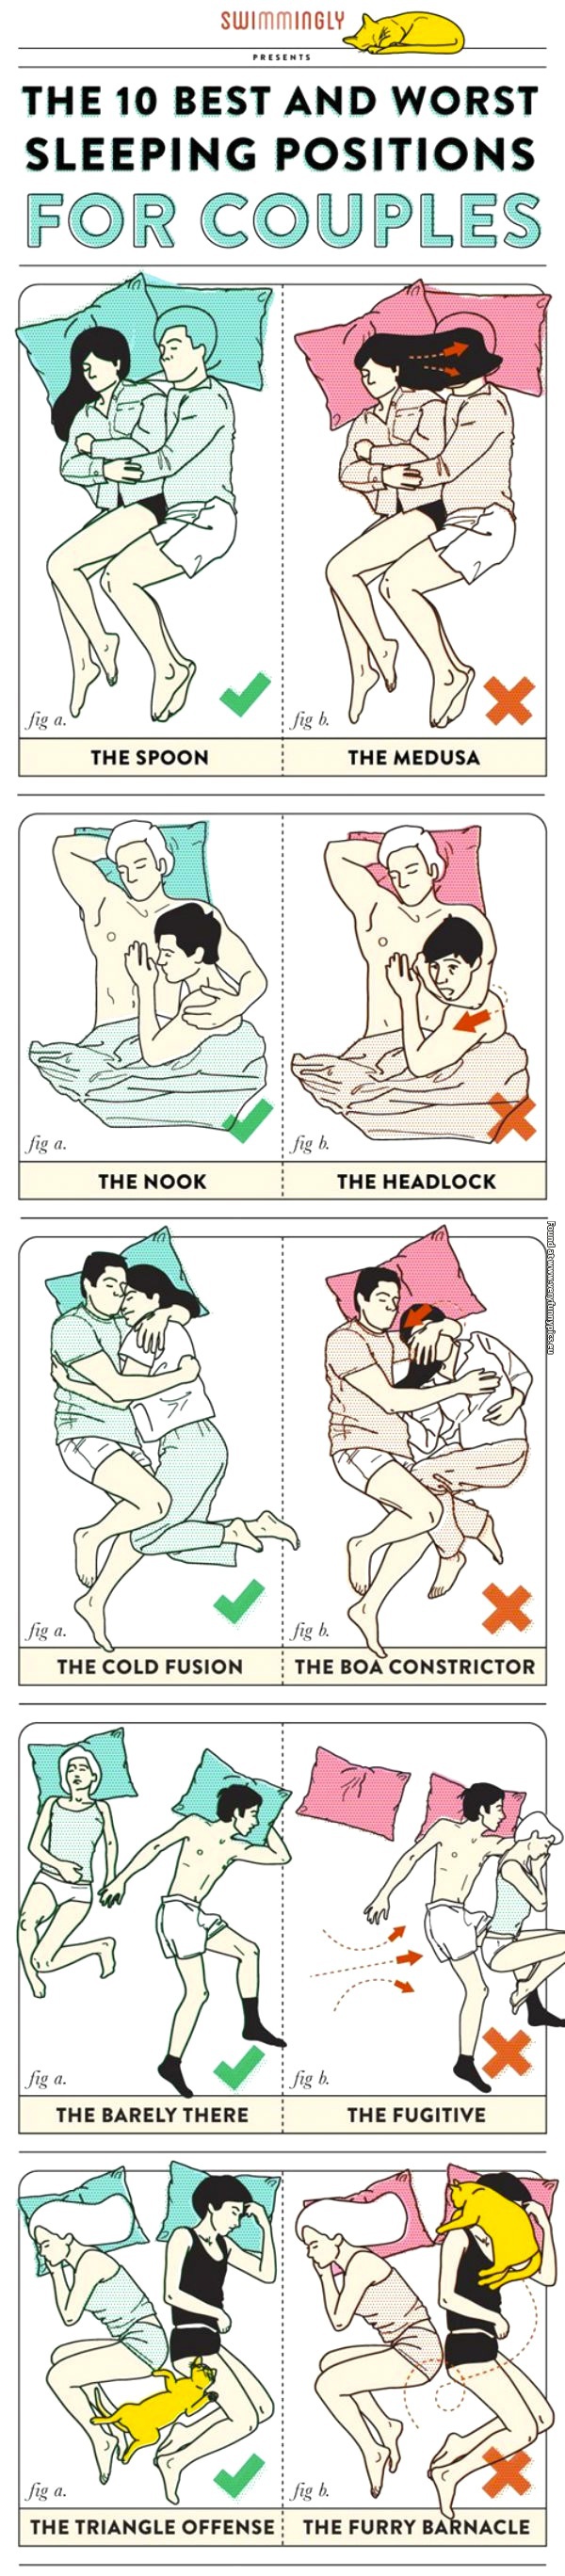 funny-pictures-best-and-worst-sleeping-positions-for-couples